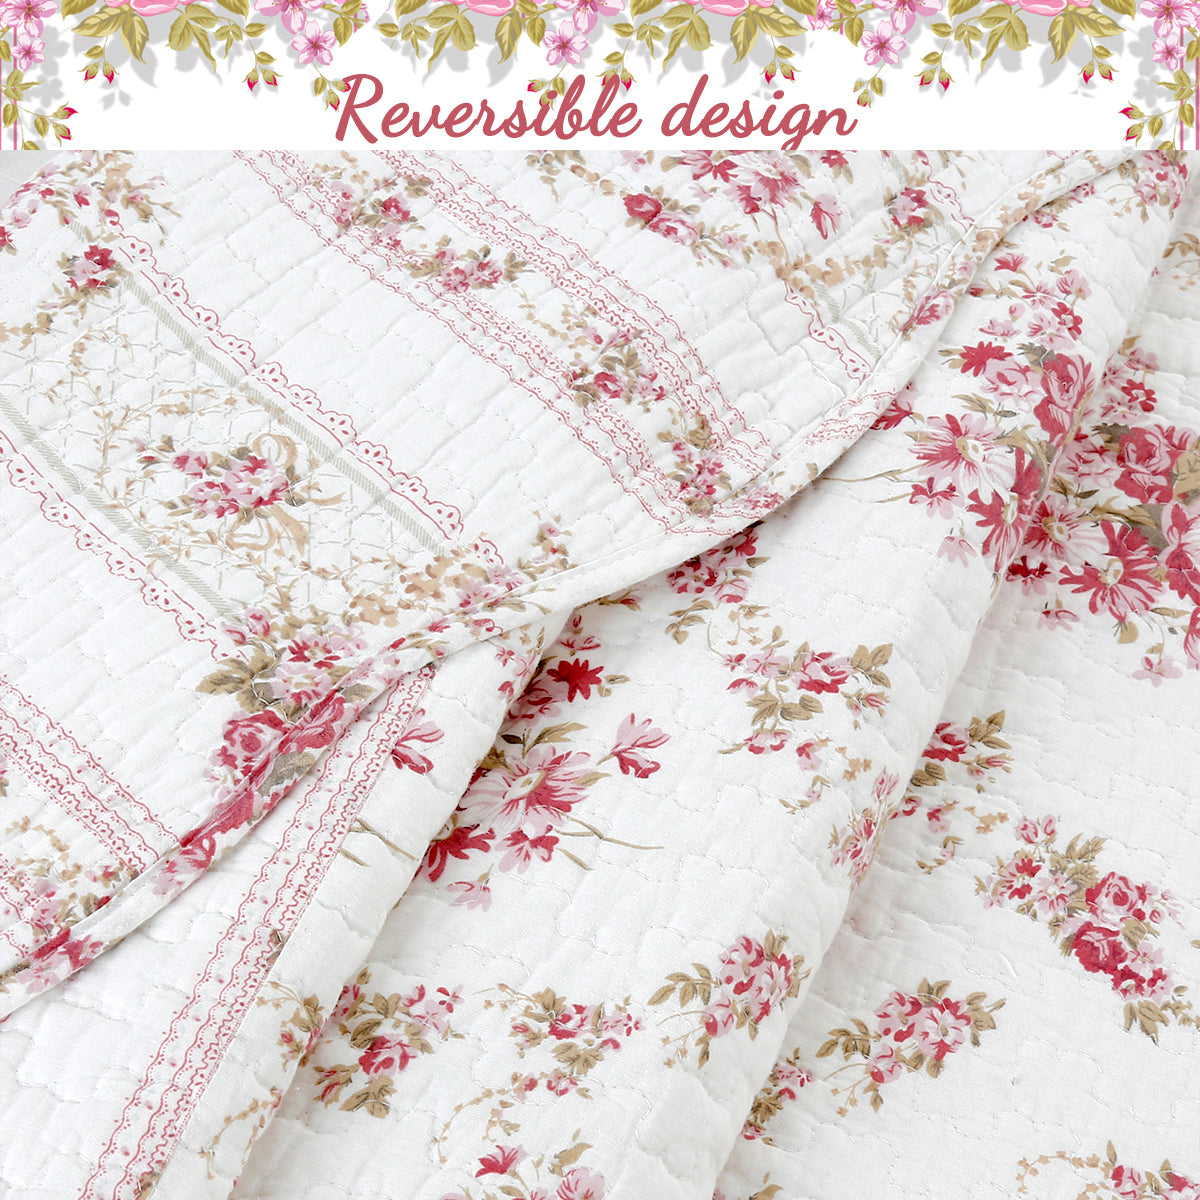 Shabby Chic Vintage Floral Rose Garden Scalloped Cotton Quilted Reversible Throw Blanket